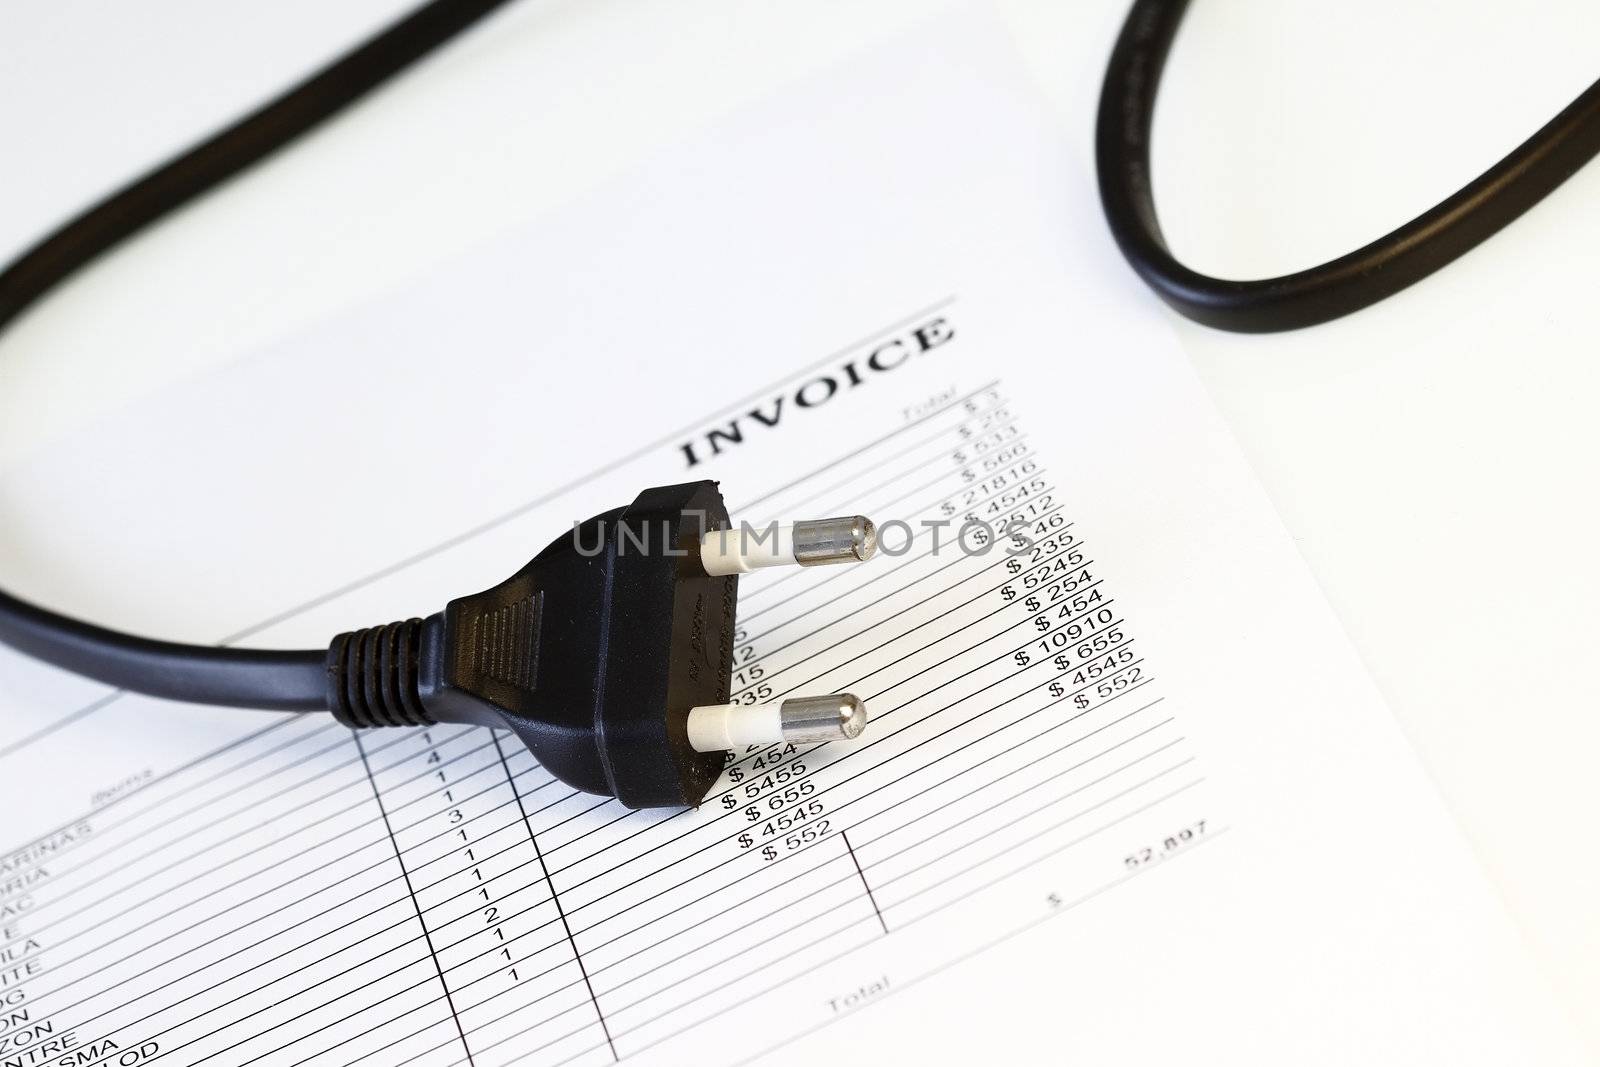 Electricity bill invoice in a white background.